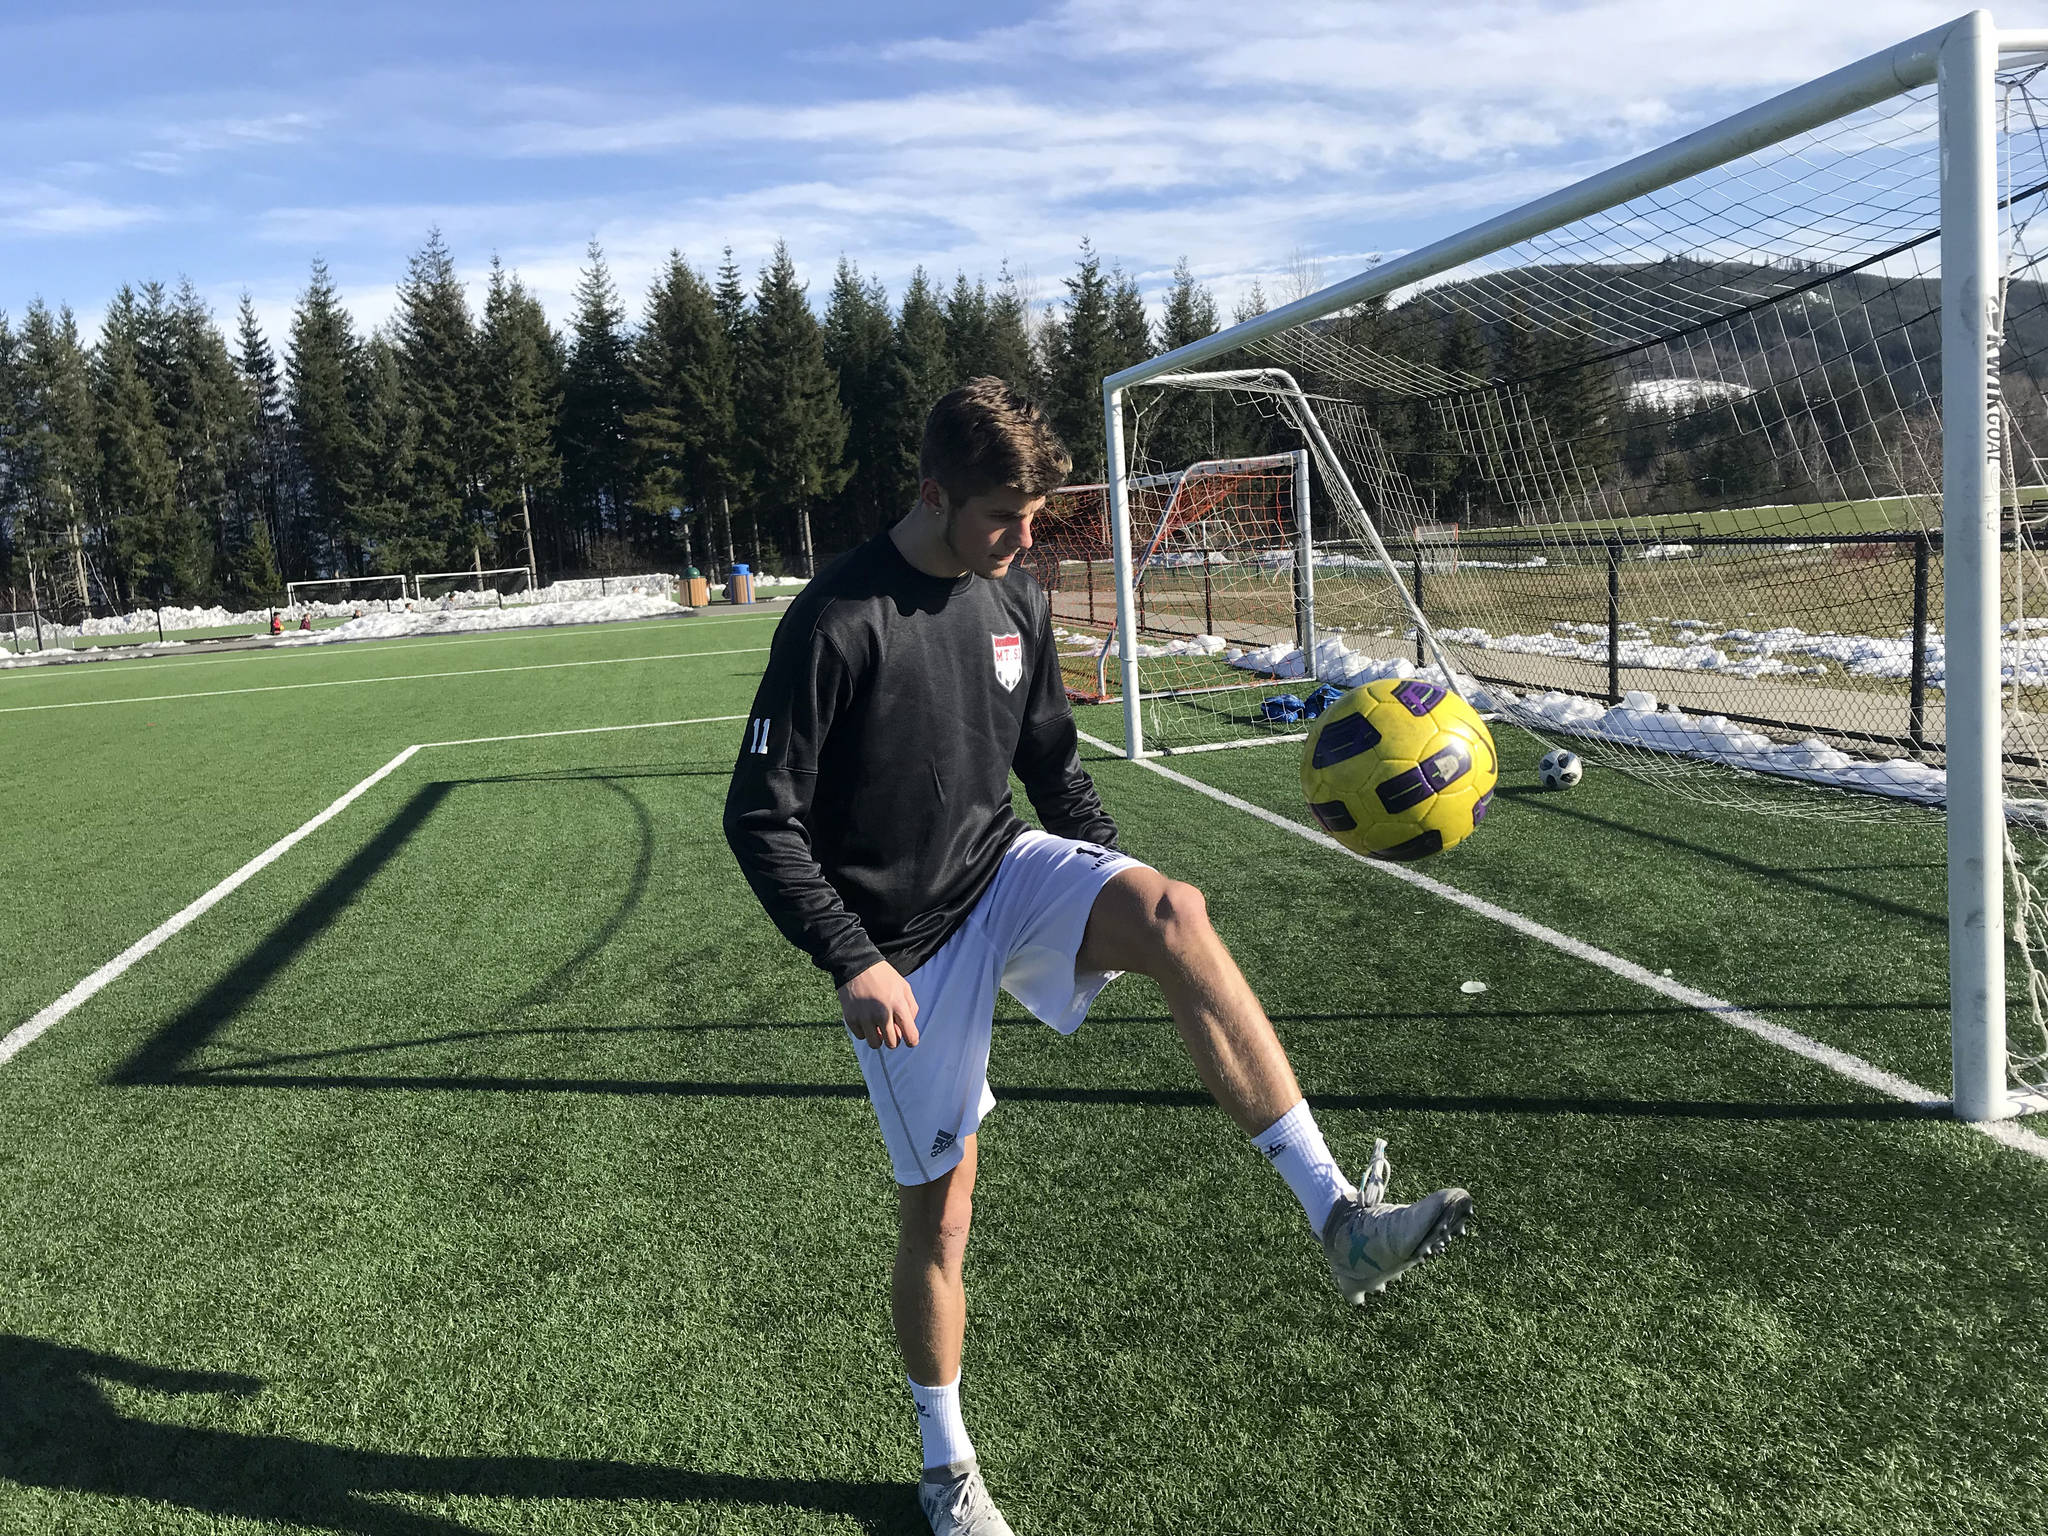 Mount Si Wildcats senior soccer player Drew Harris has returned to the Mount Si Wildcats high school soccer program after a two-year hiatus. Harris expects the Wildcats to make a deep run in the postseason this spring. Shaun Scott, staff photo